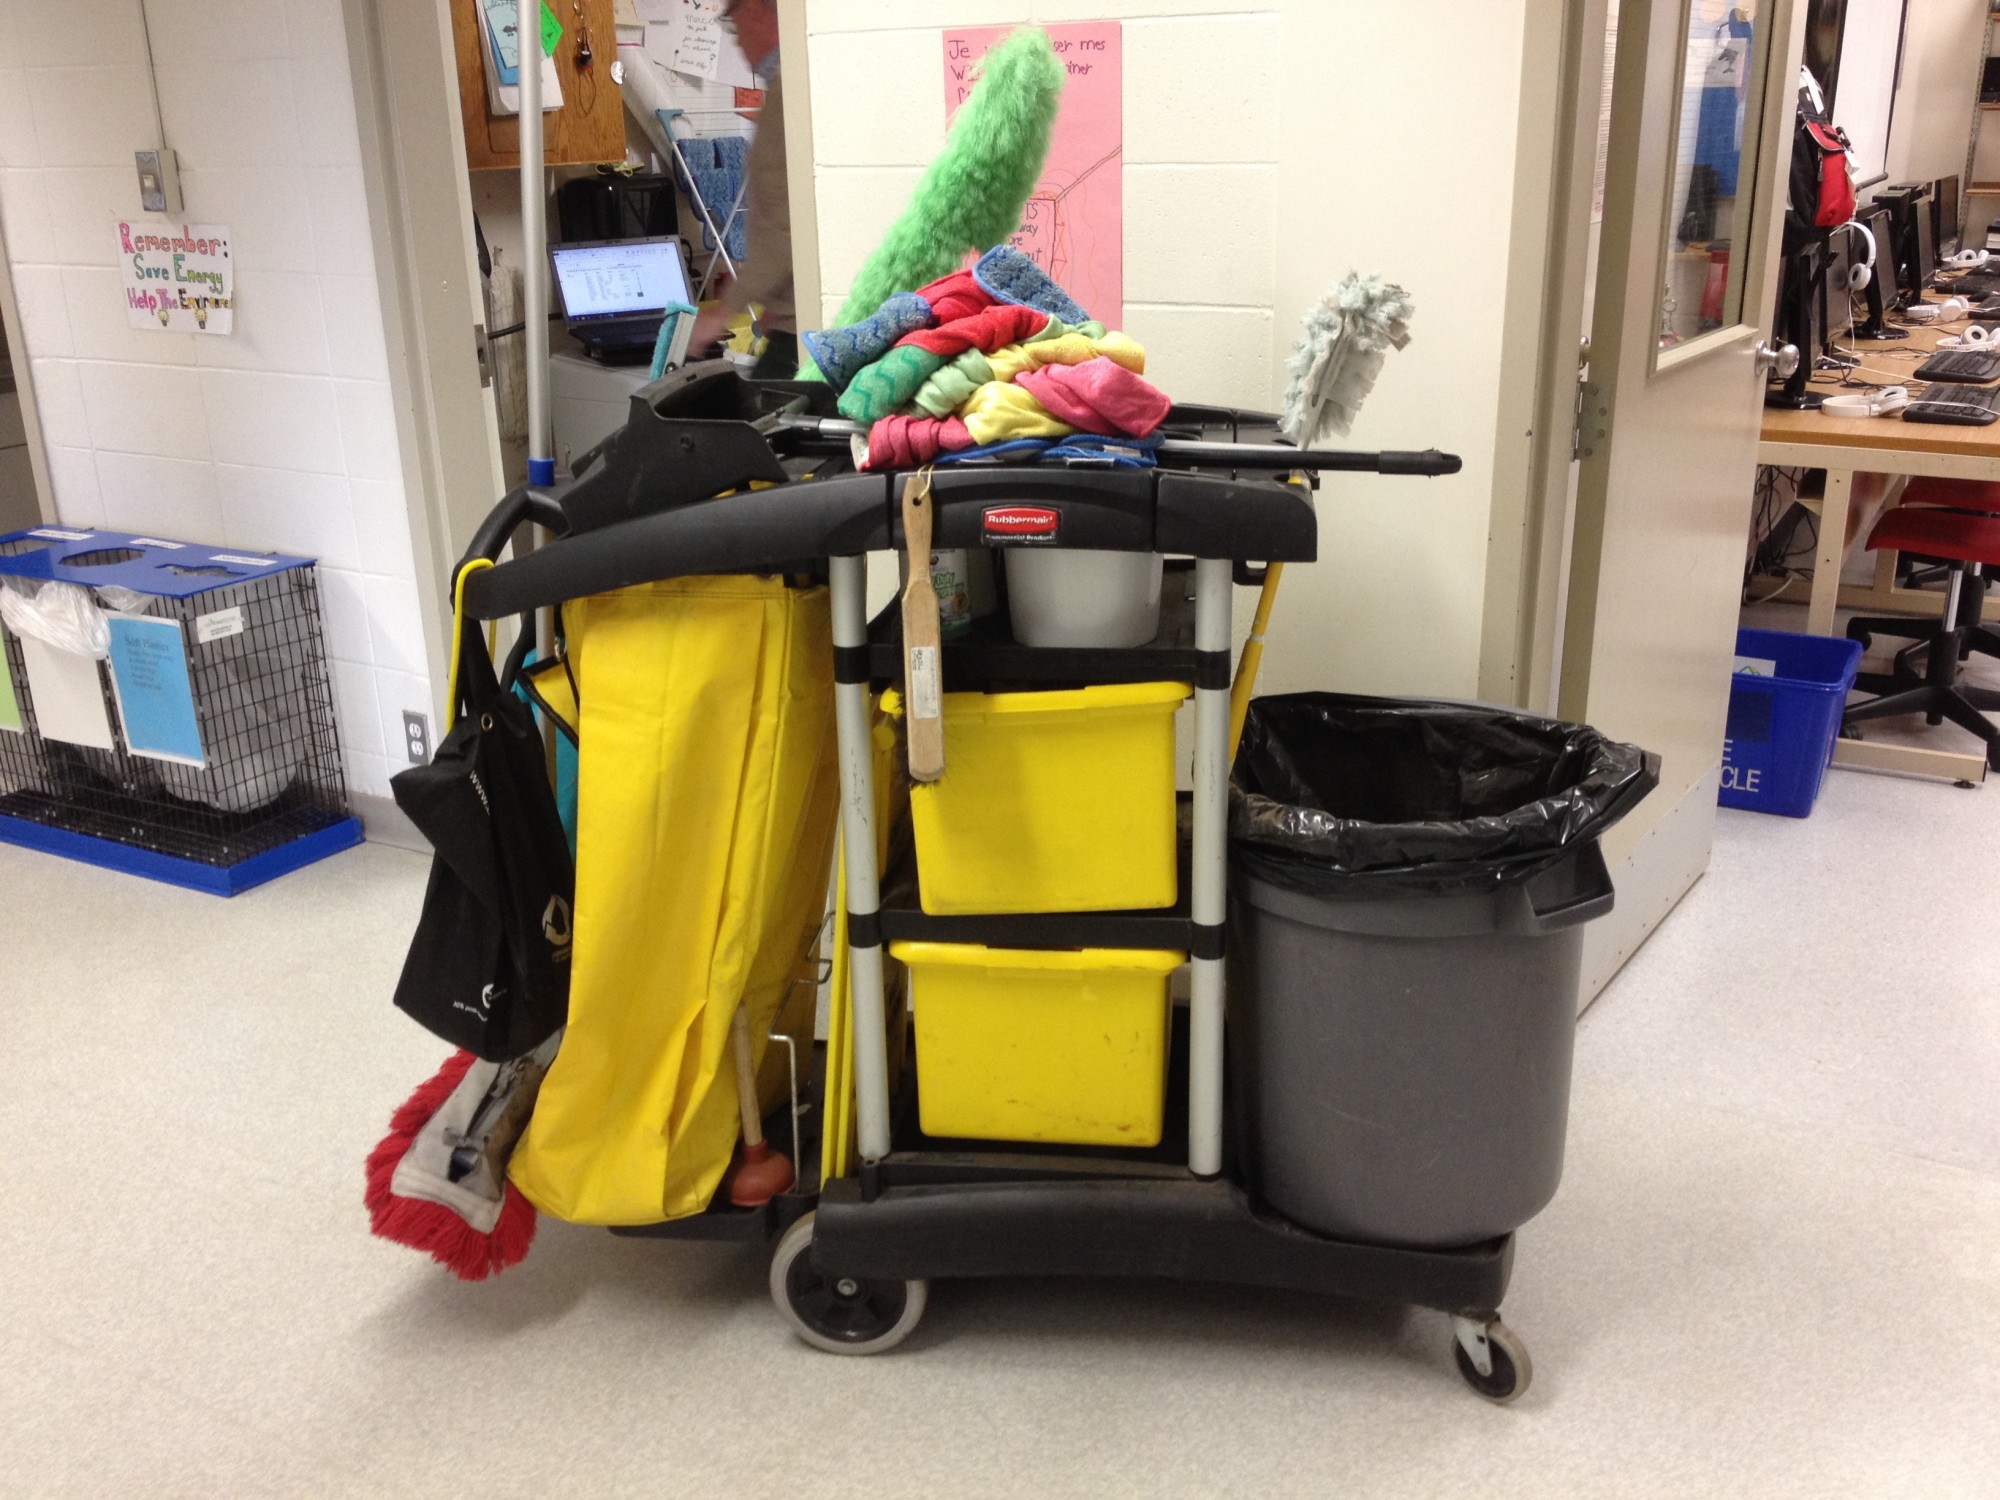 Janitorial Cart with Supplies